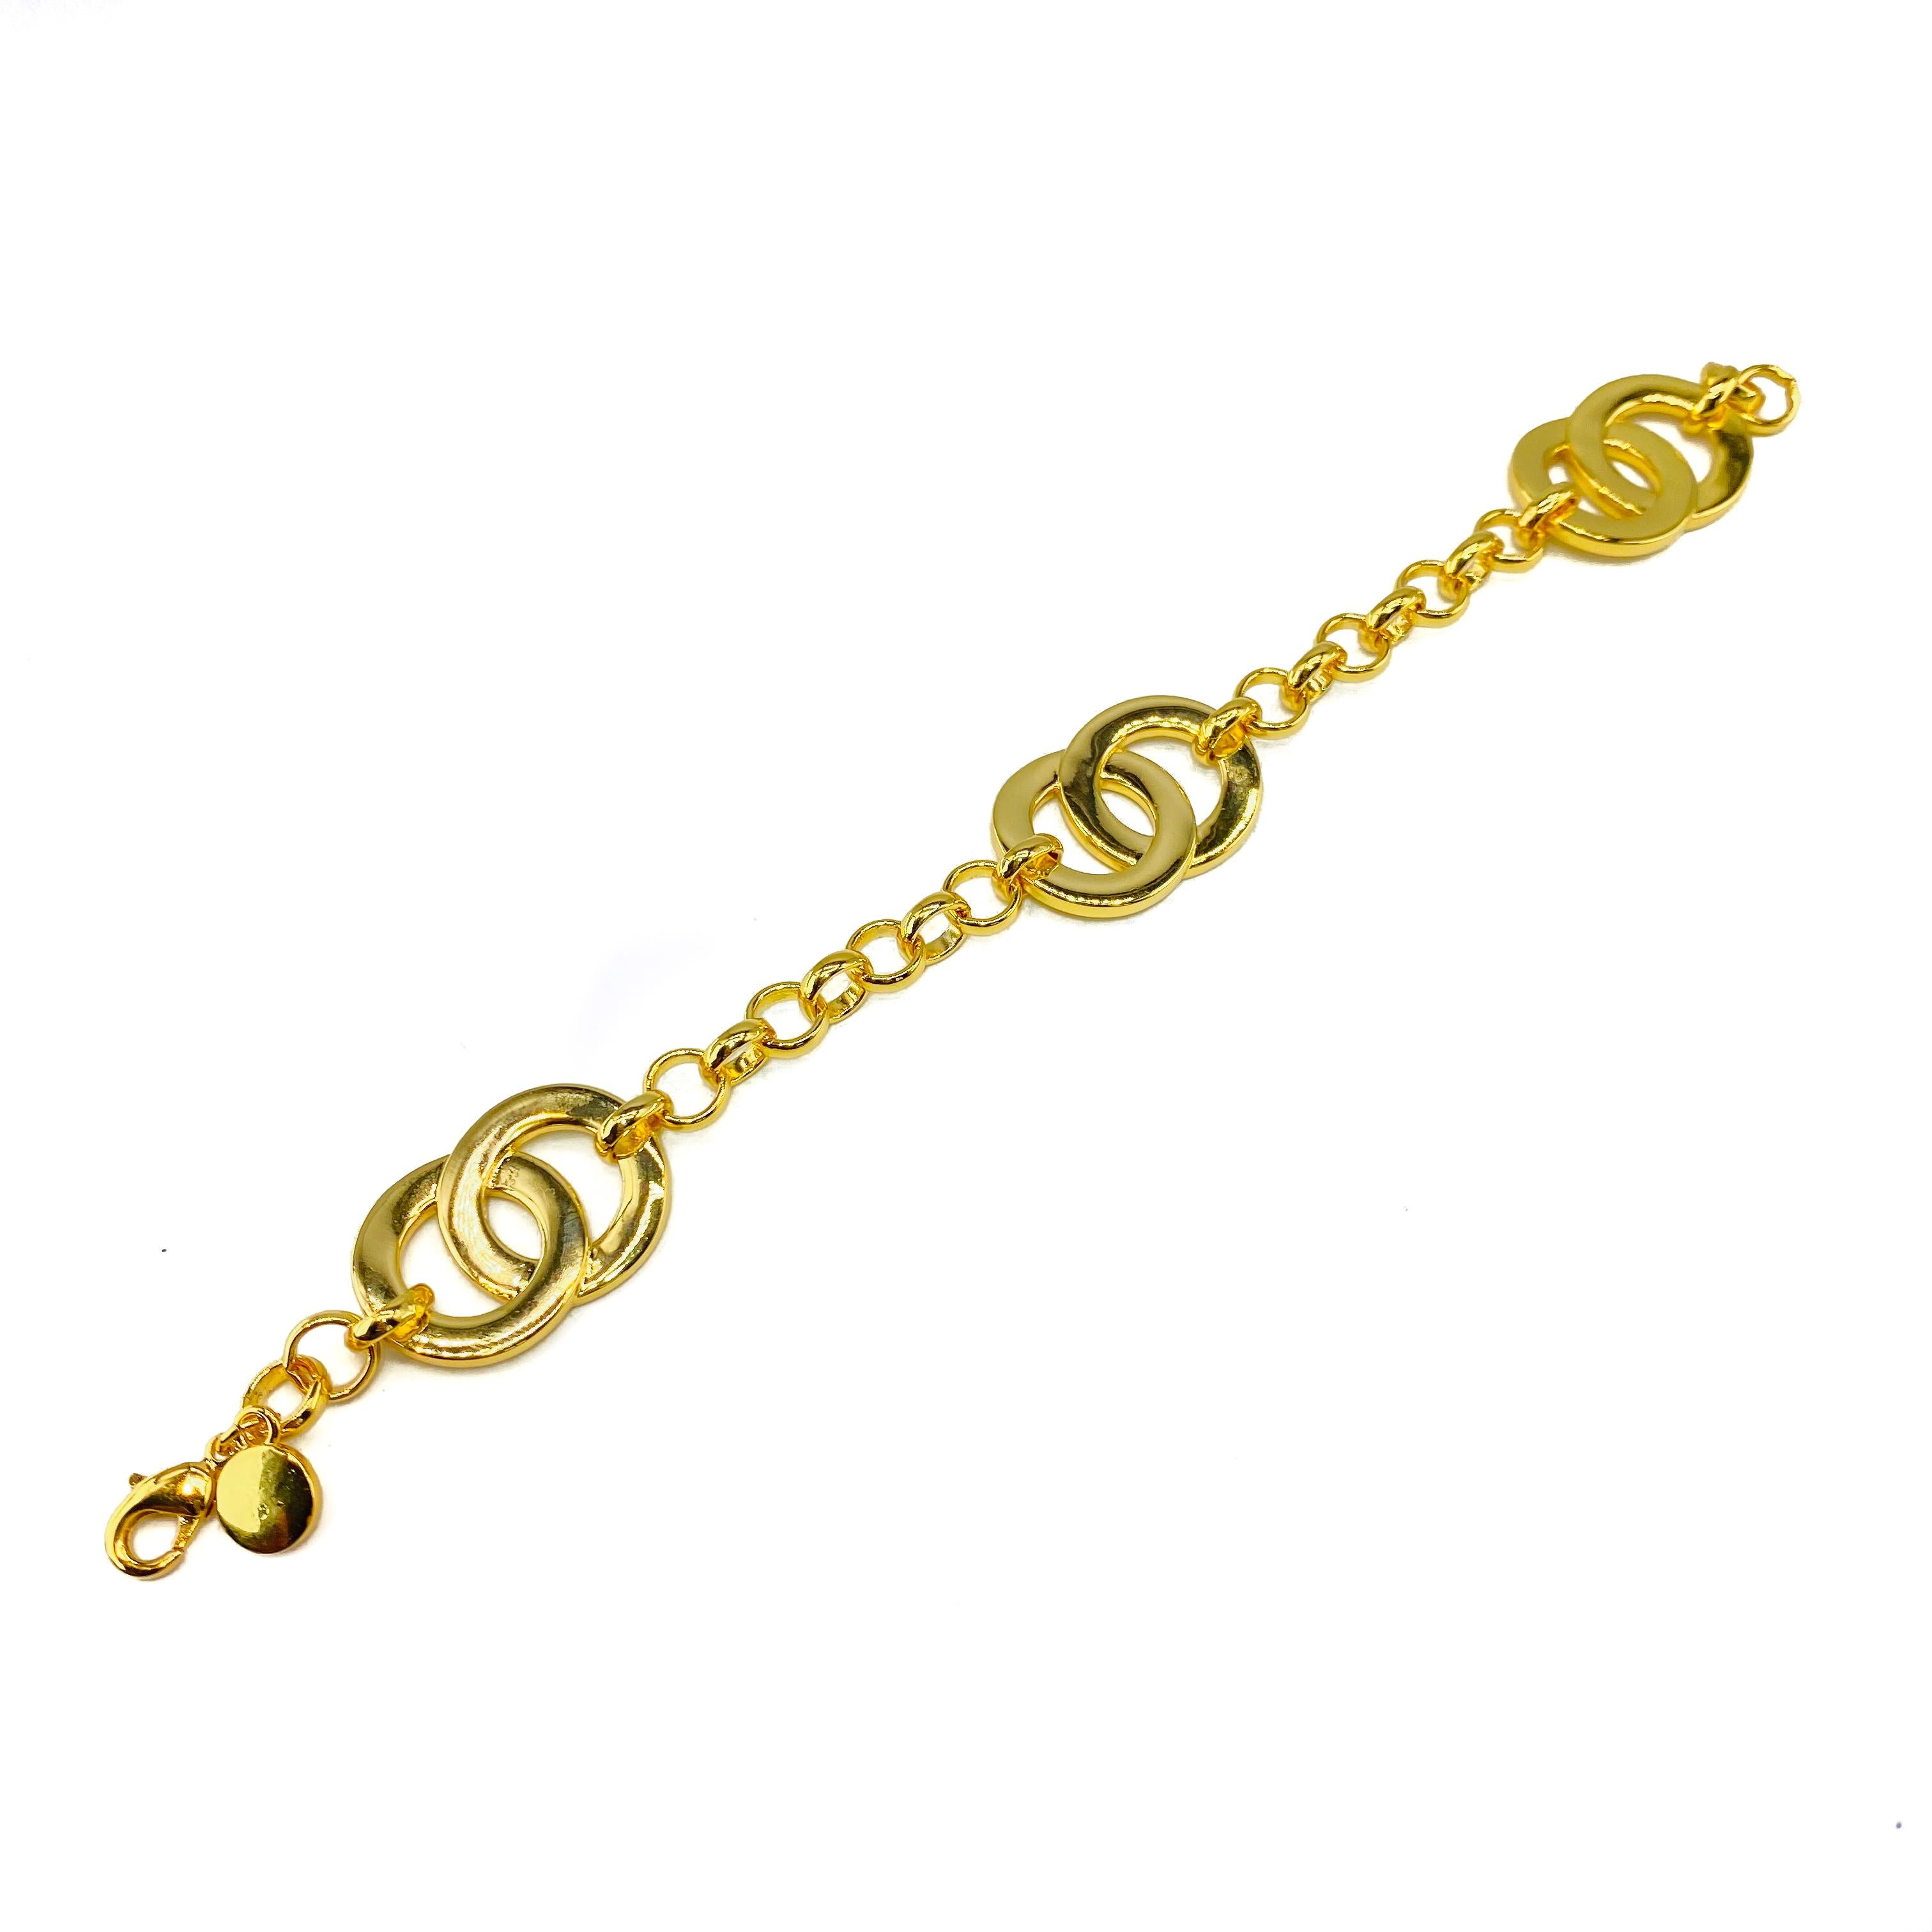 Celine Vintage 1990s Chain Bracelet


Detail
-Made in France in the 1990s
-Crafted from gold plated metal
-Featuring three interlocking circles - a classic Celine icon of the era

Size & Fit
-Length - 6 inches
-Width - 0.5 inches
-Lobster claw